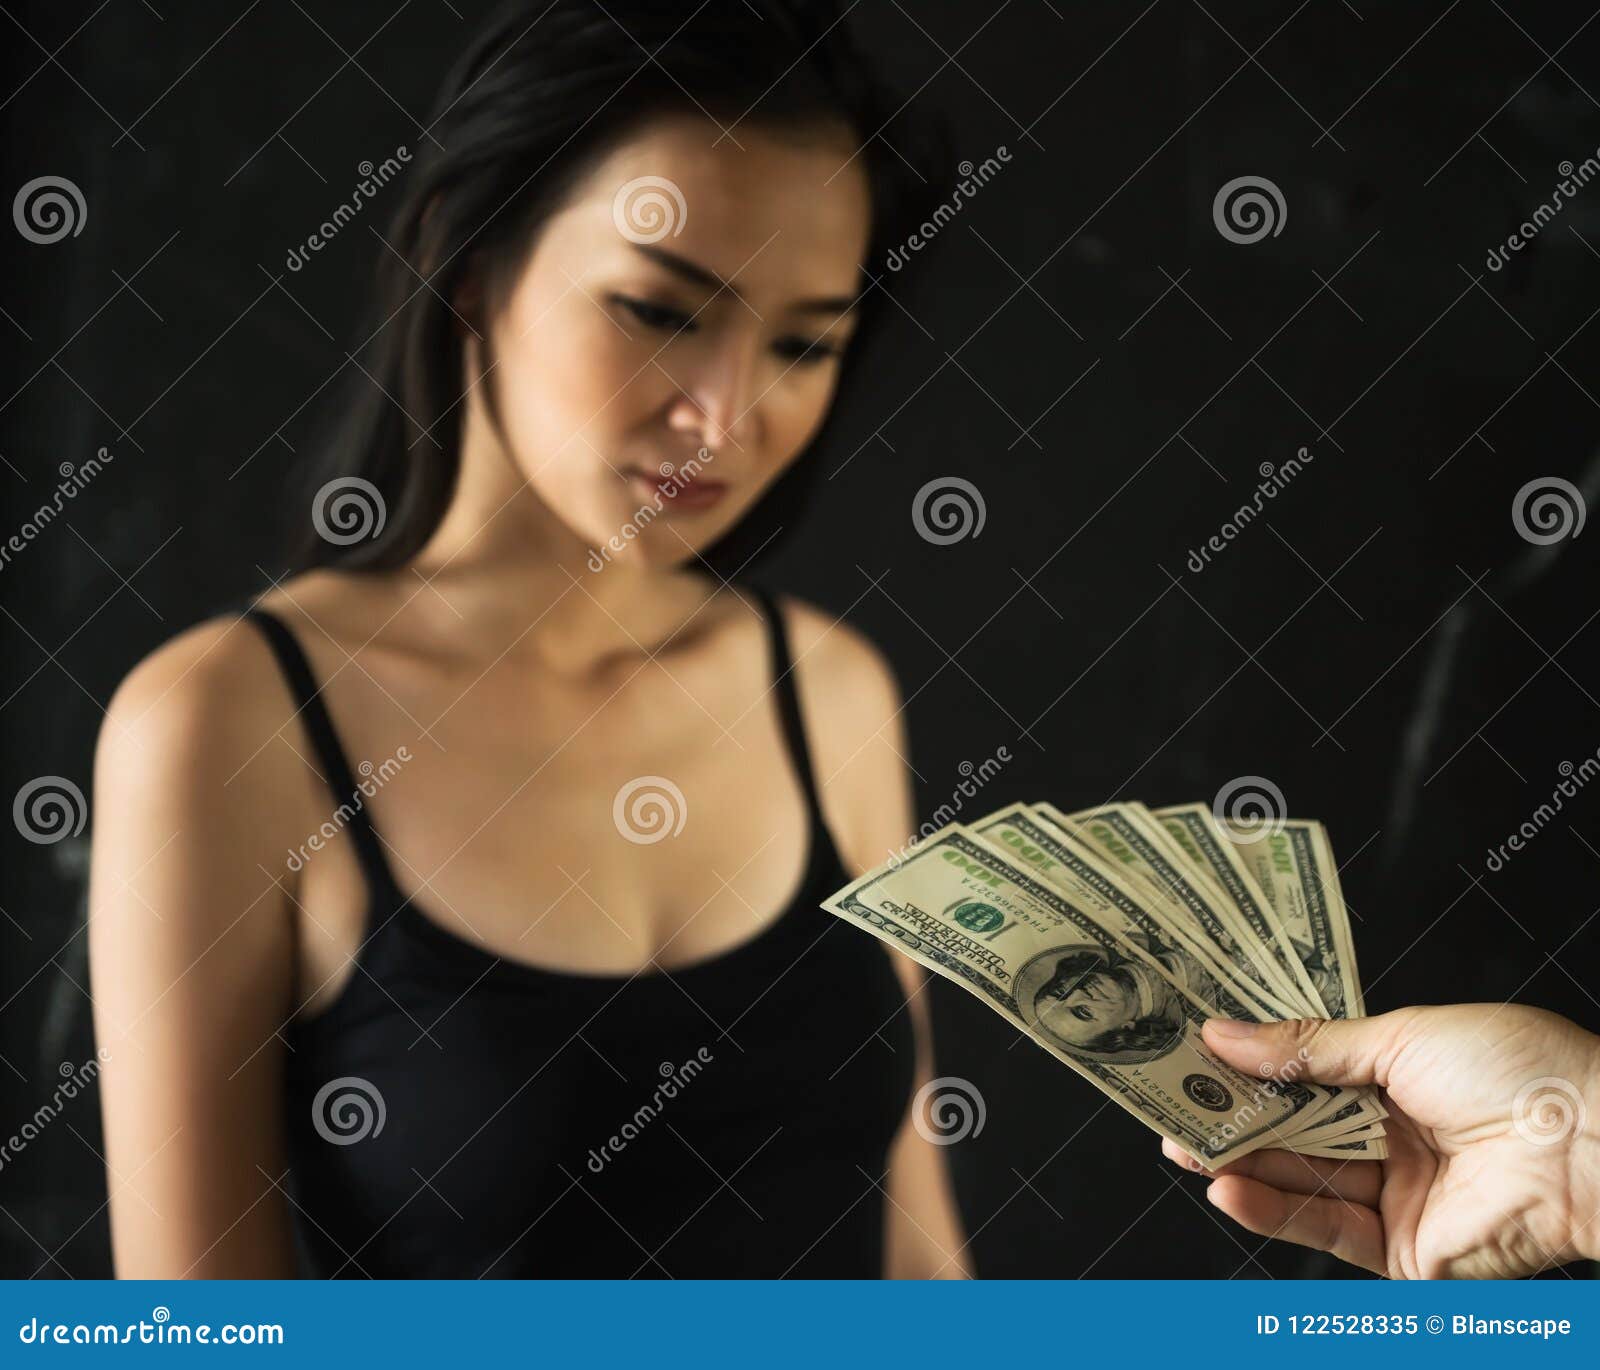 Have sex who money women for Why women